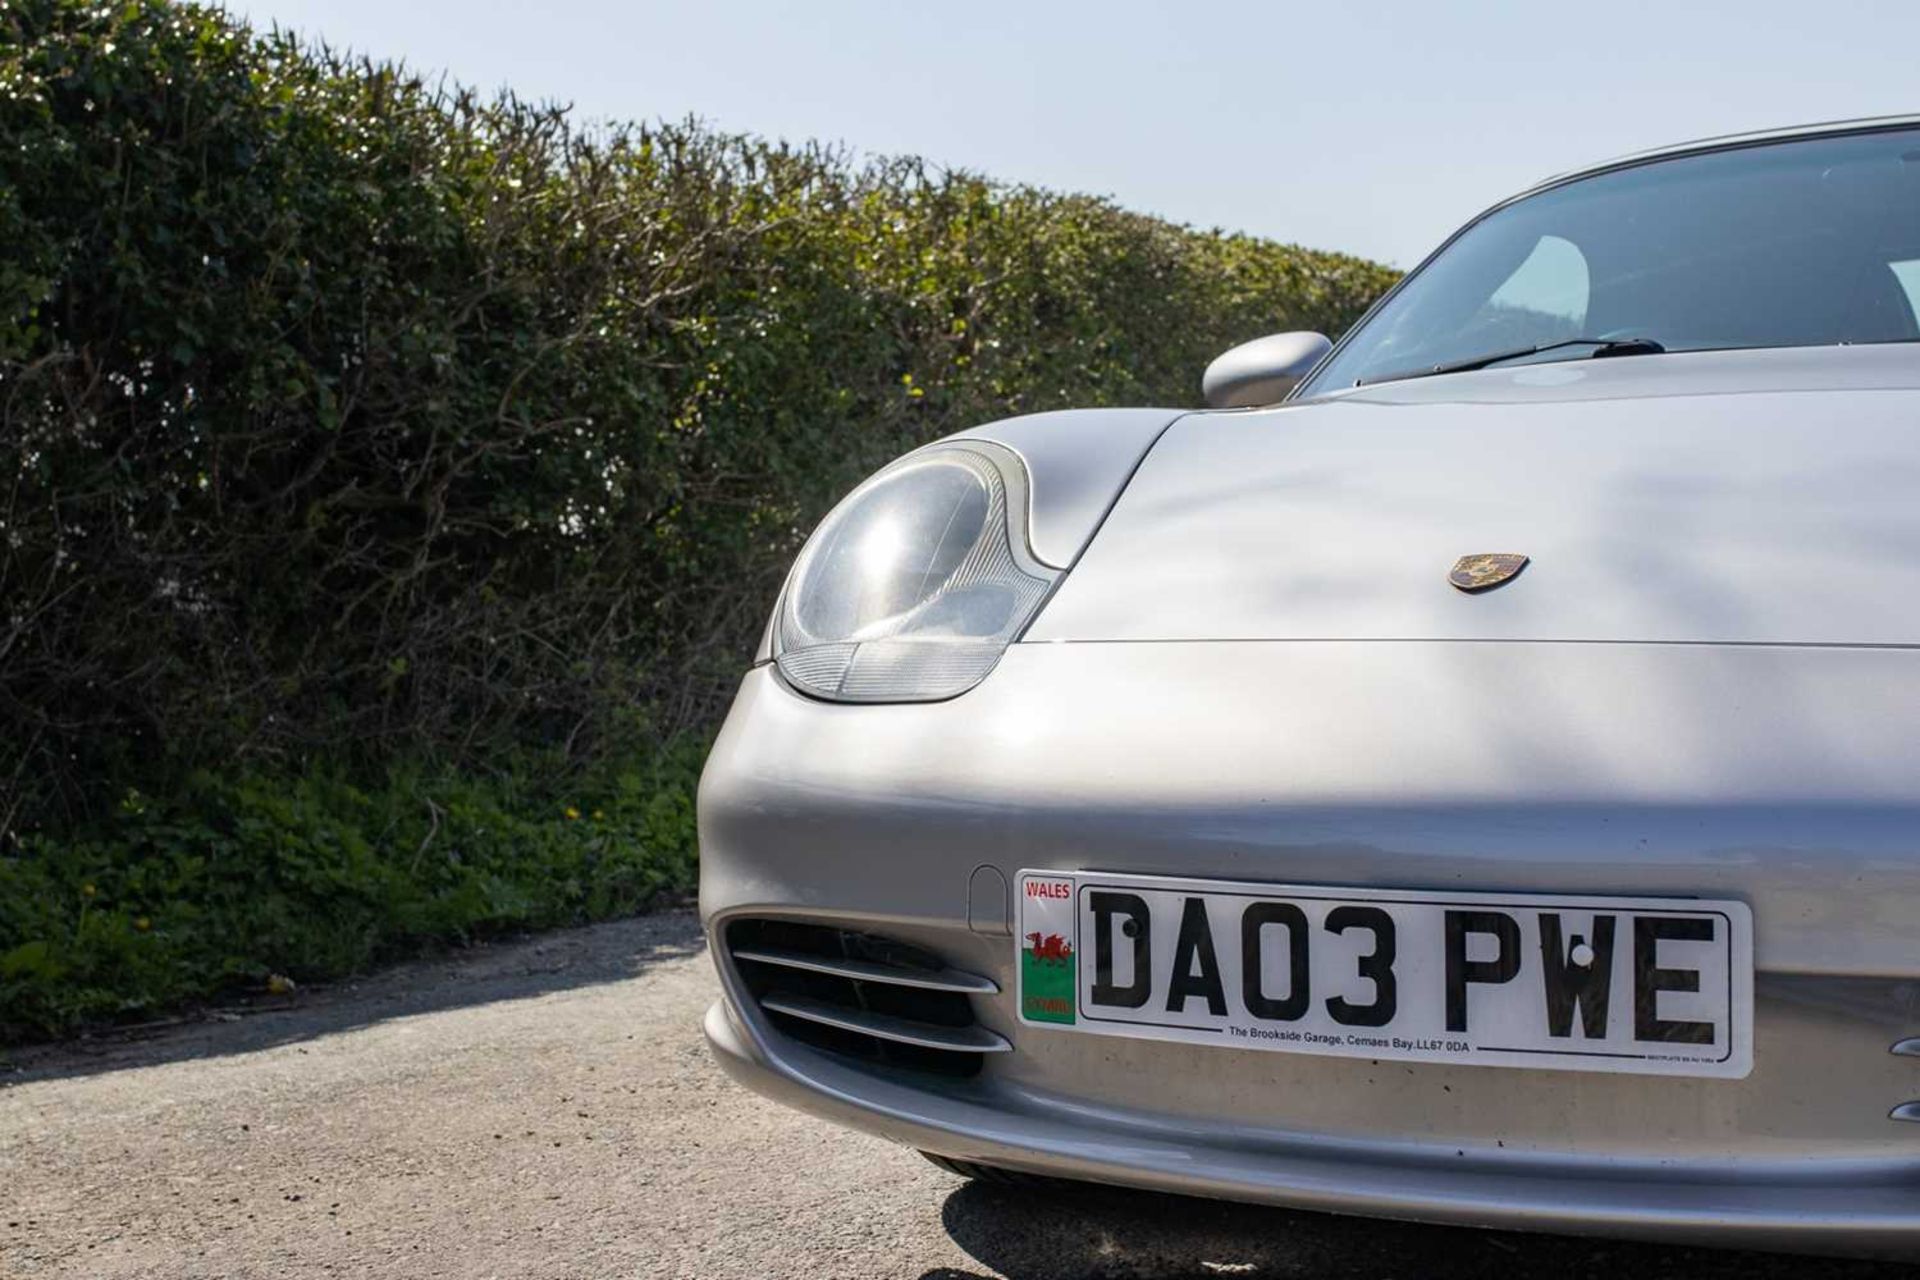 2003 Porsche Boxster 2.7  Desirable manual gearbox  - Image 34 of 85